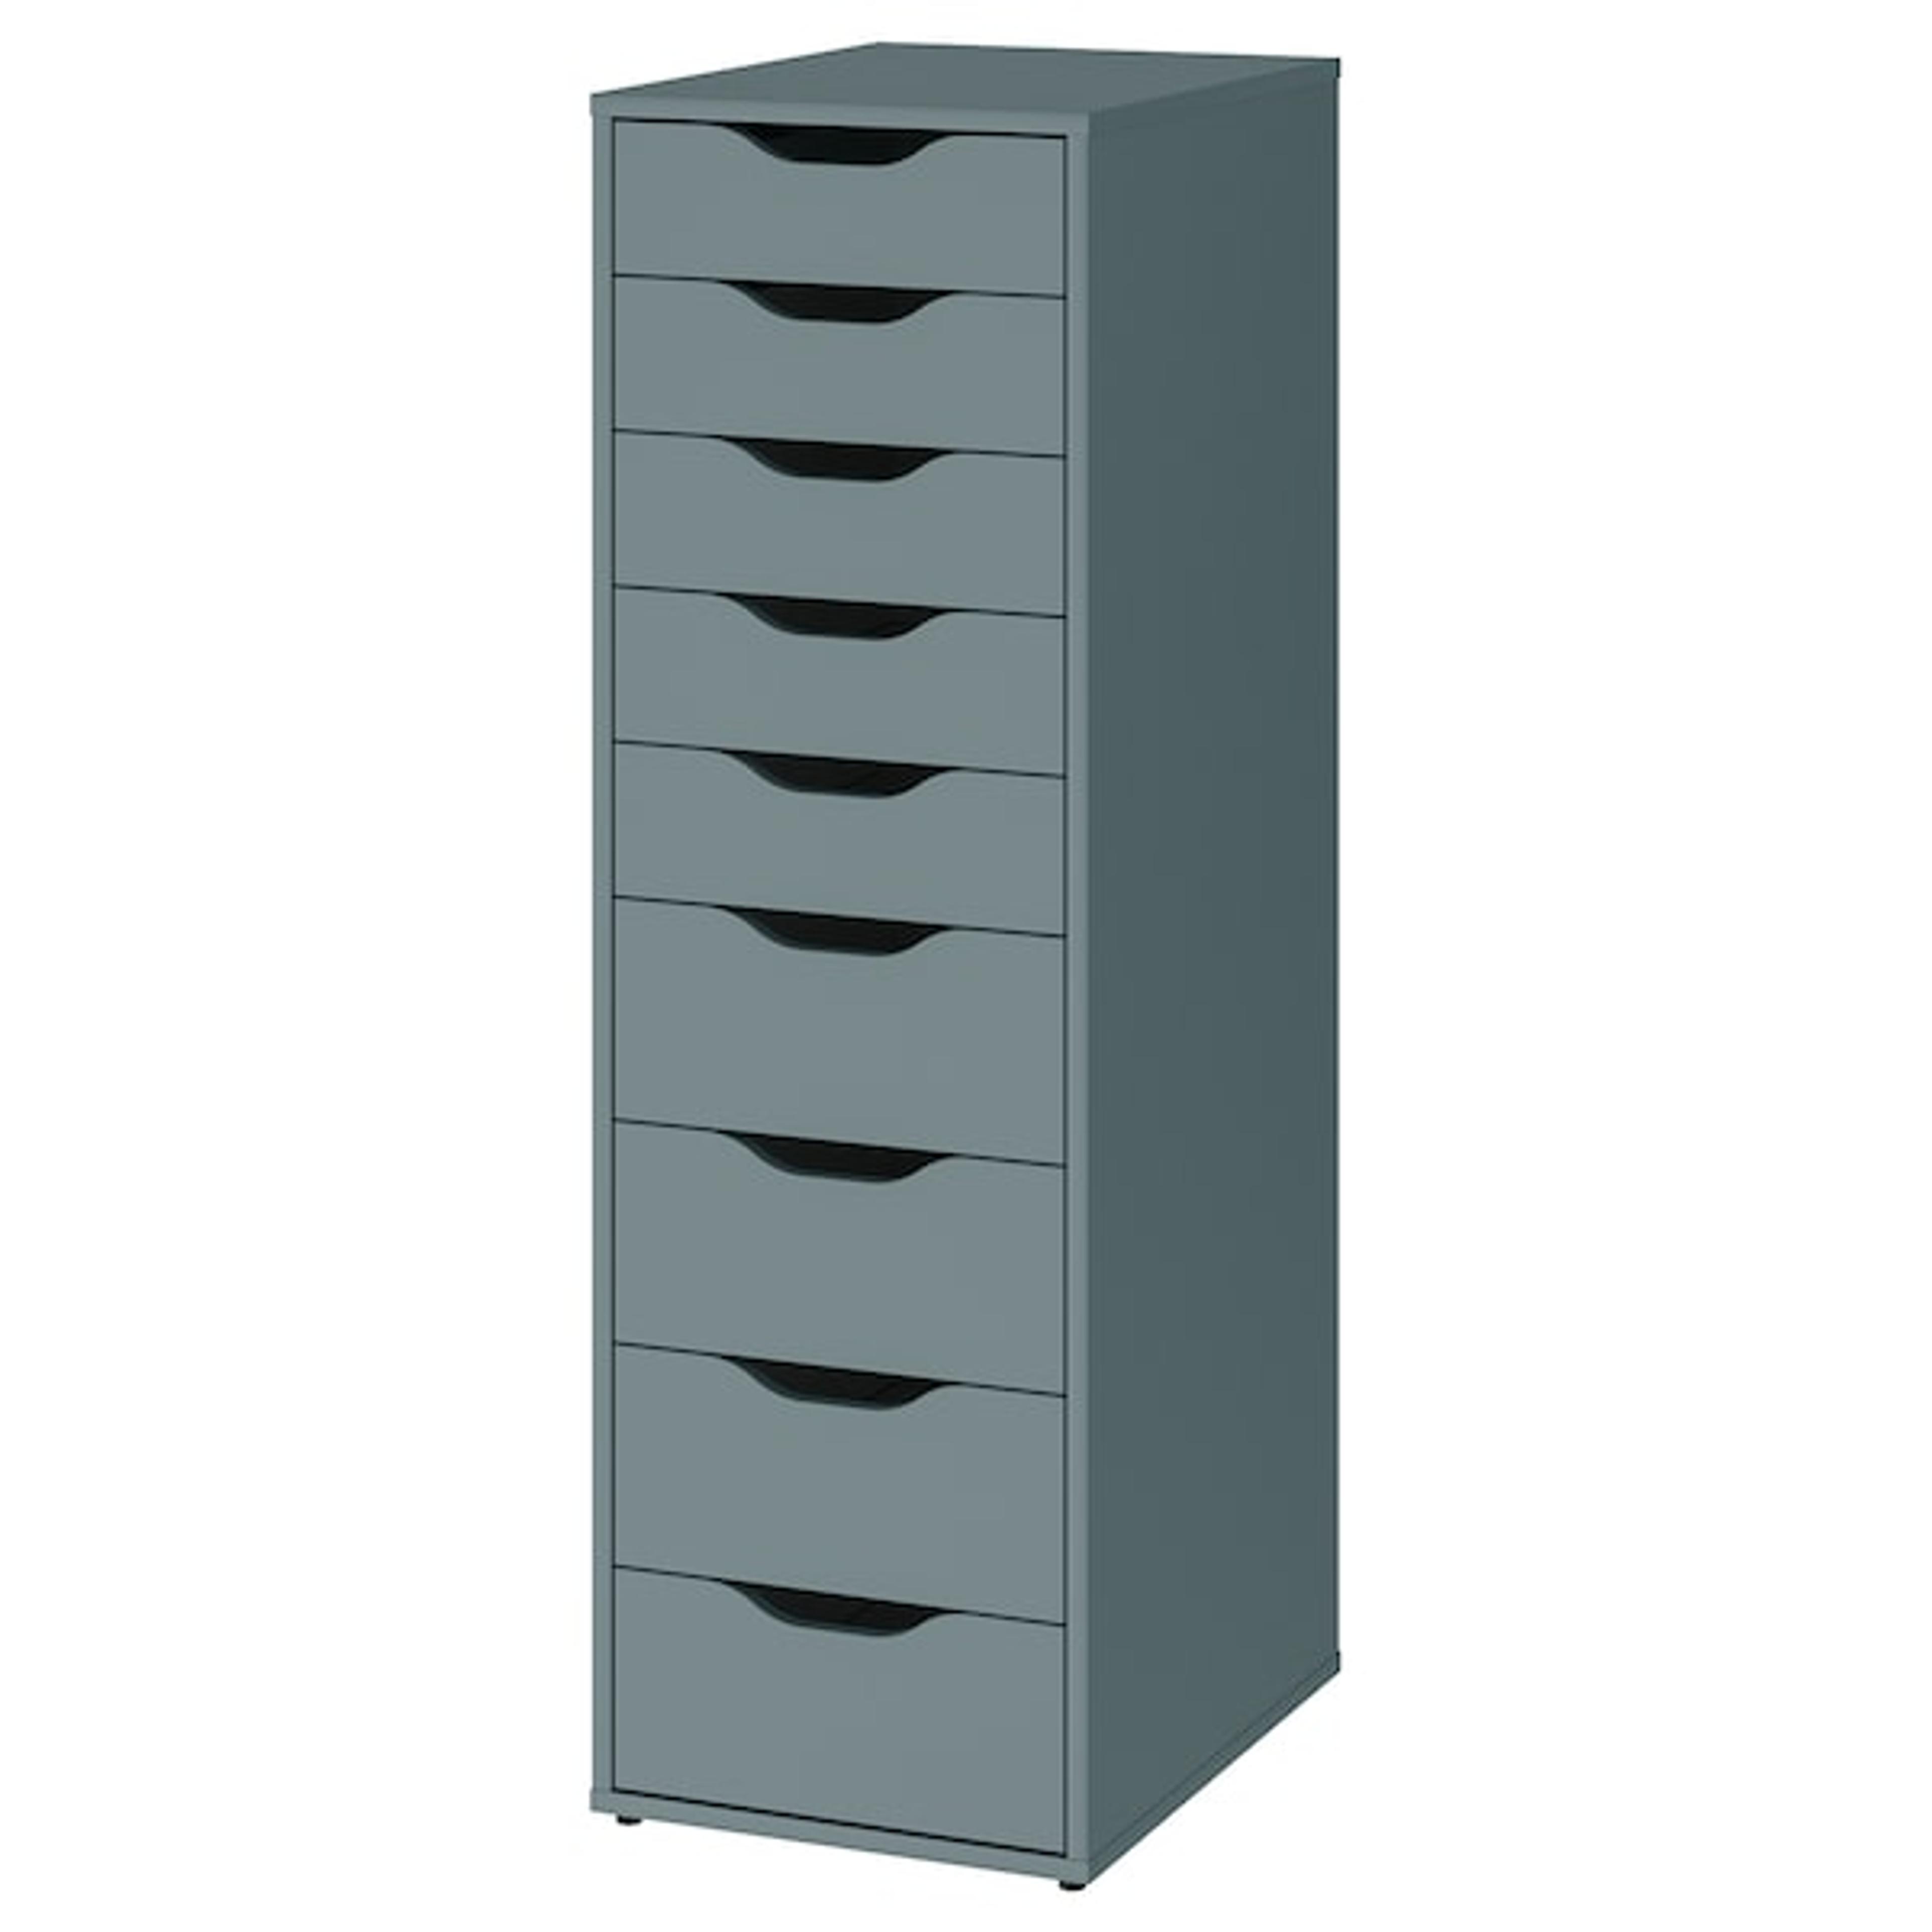 ALEX Drawer unit with 9 drawers, gray-turquoise, 141/8x455/8" - IKEA